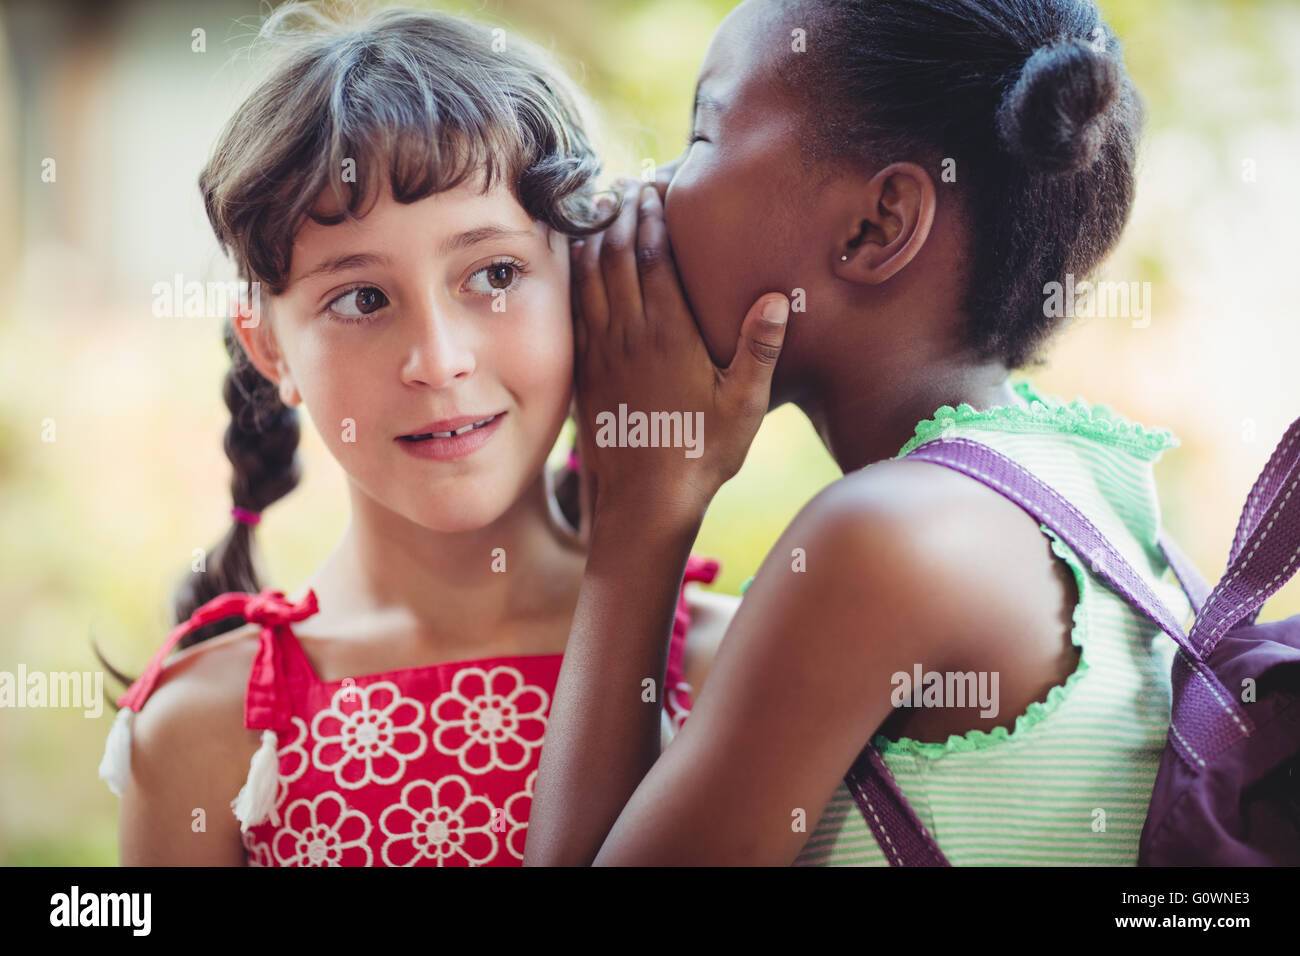 Girl telling a secret to her friend Stock Photo